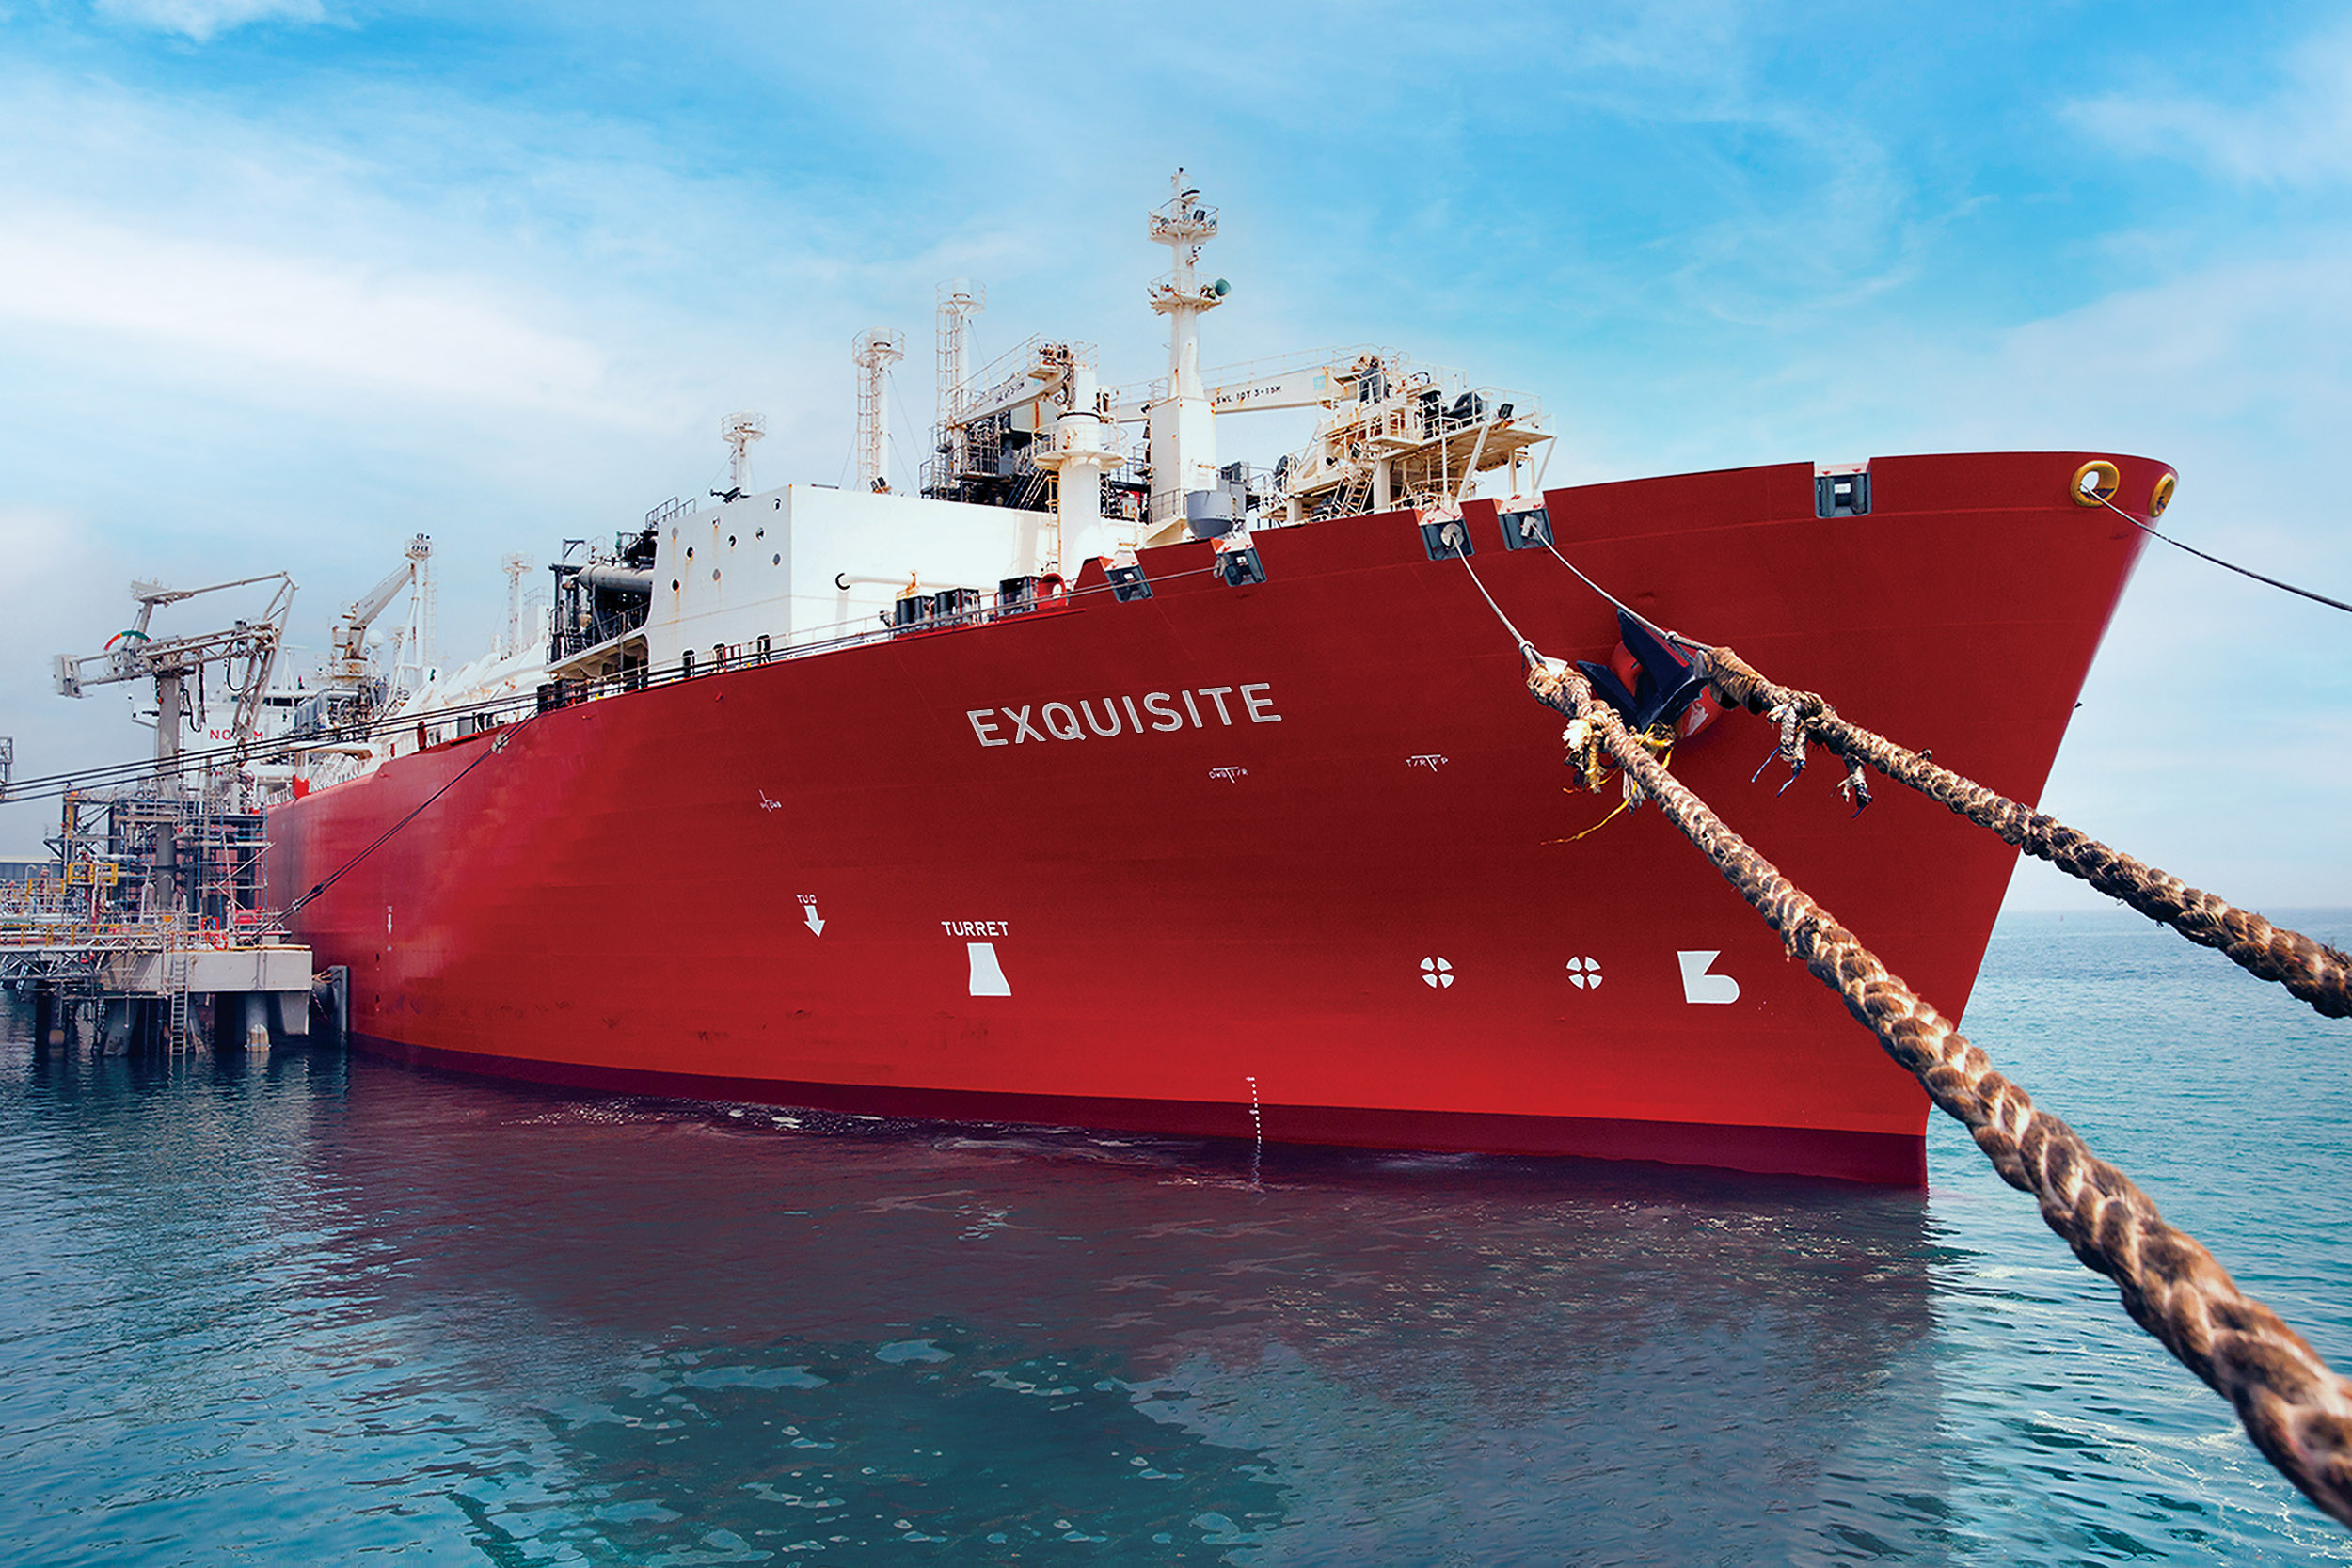 Qatar's Nakilat, the world's largest LNG shipper, has assumed the technical ship management and operations of the FSRU Exquisite.